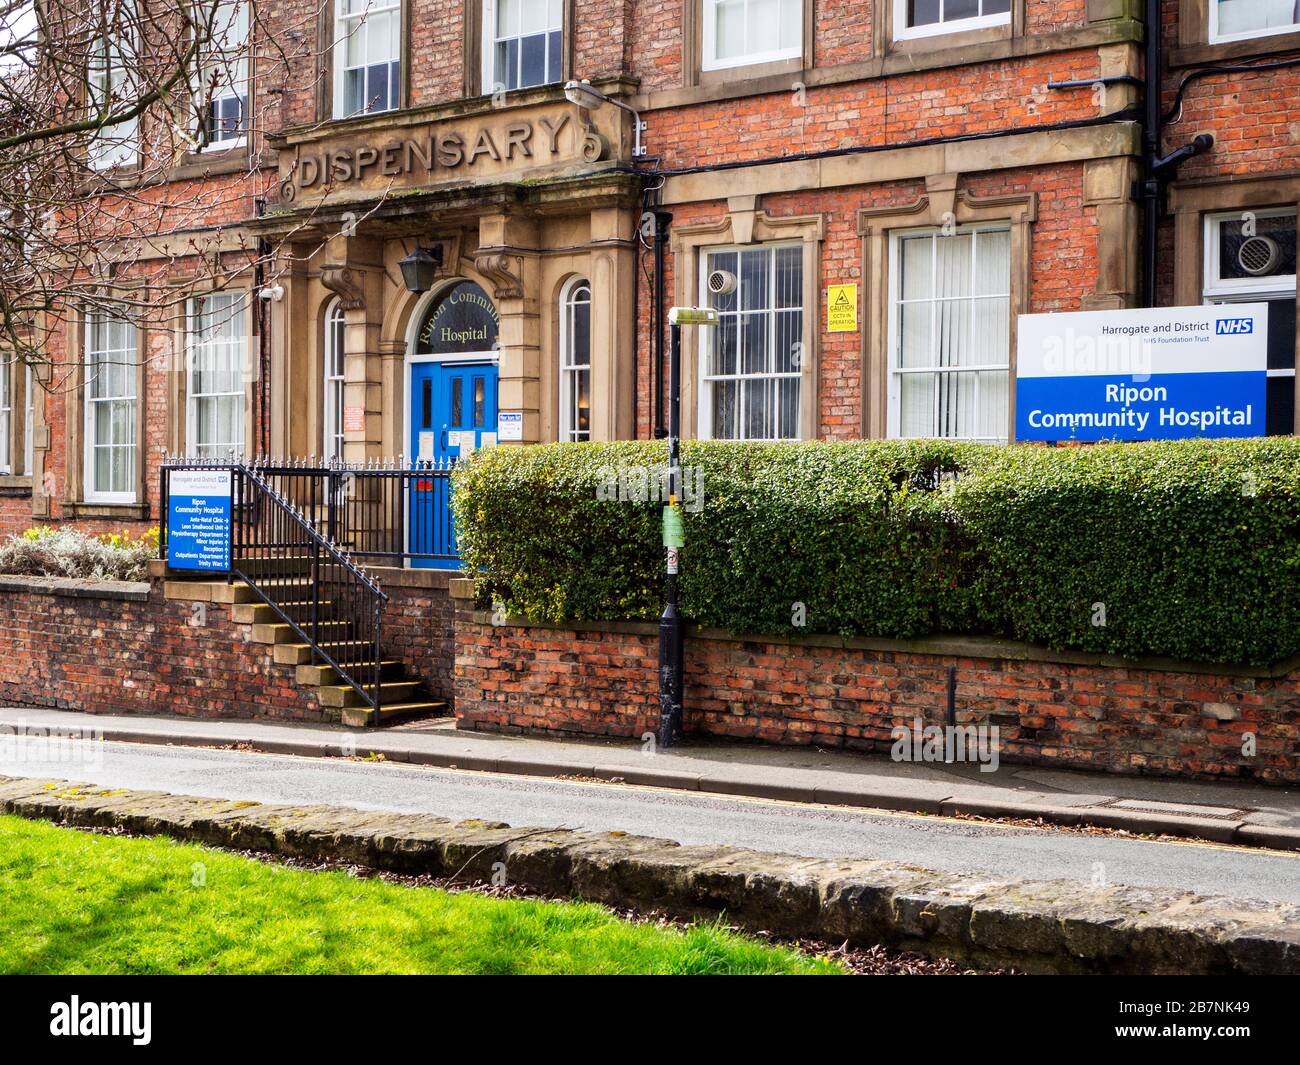 Ripon Community Hospital a grade II listed former dispensary on Firby Lane in Ripon North Yorkshire England Stock Photo